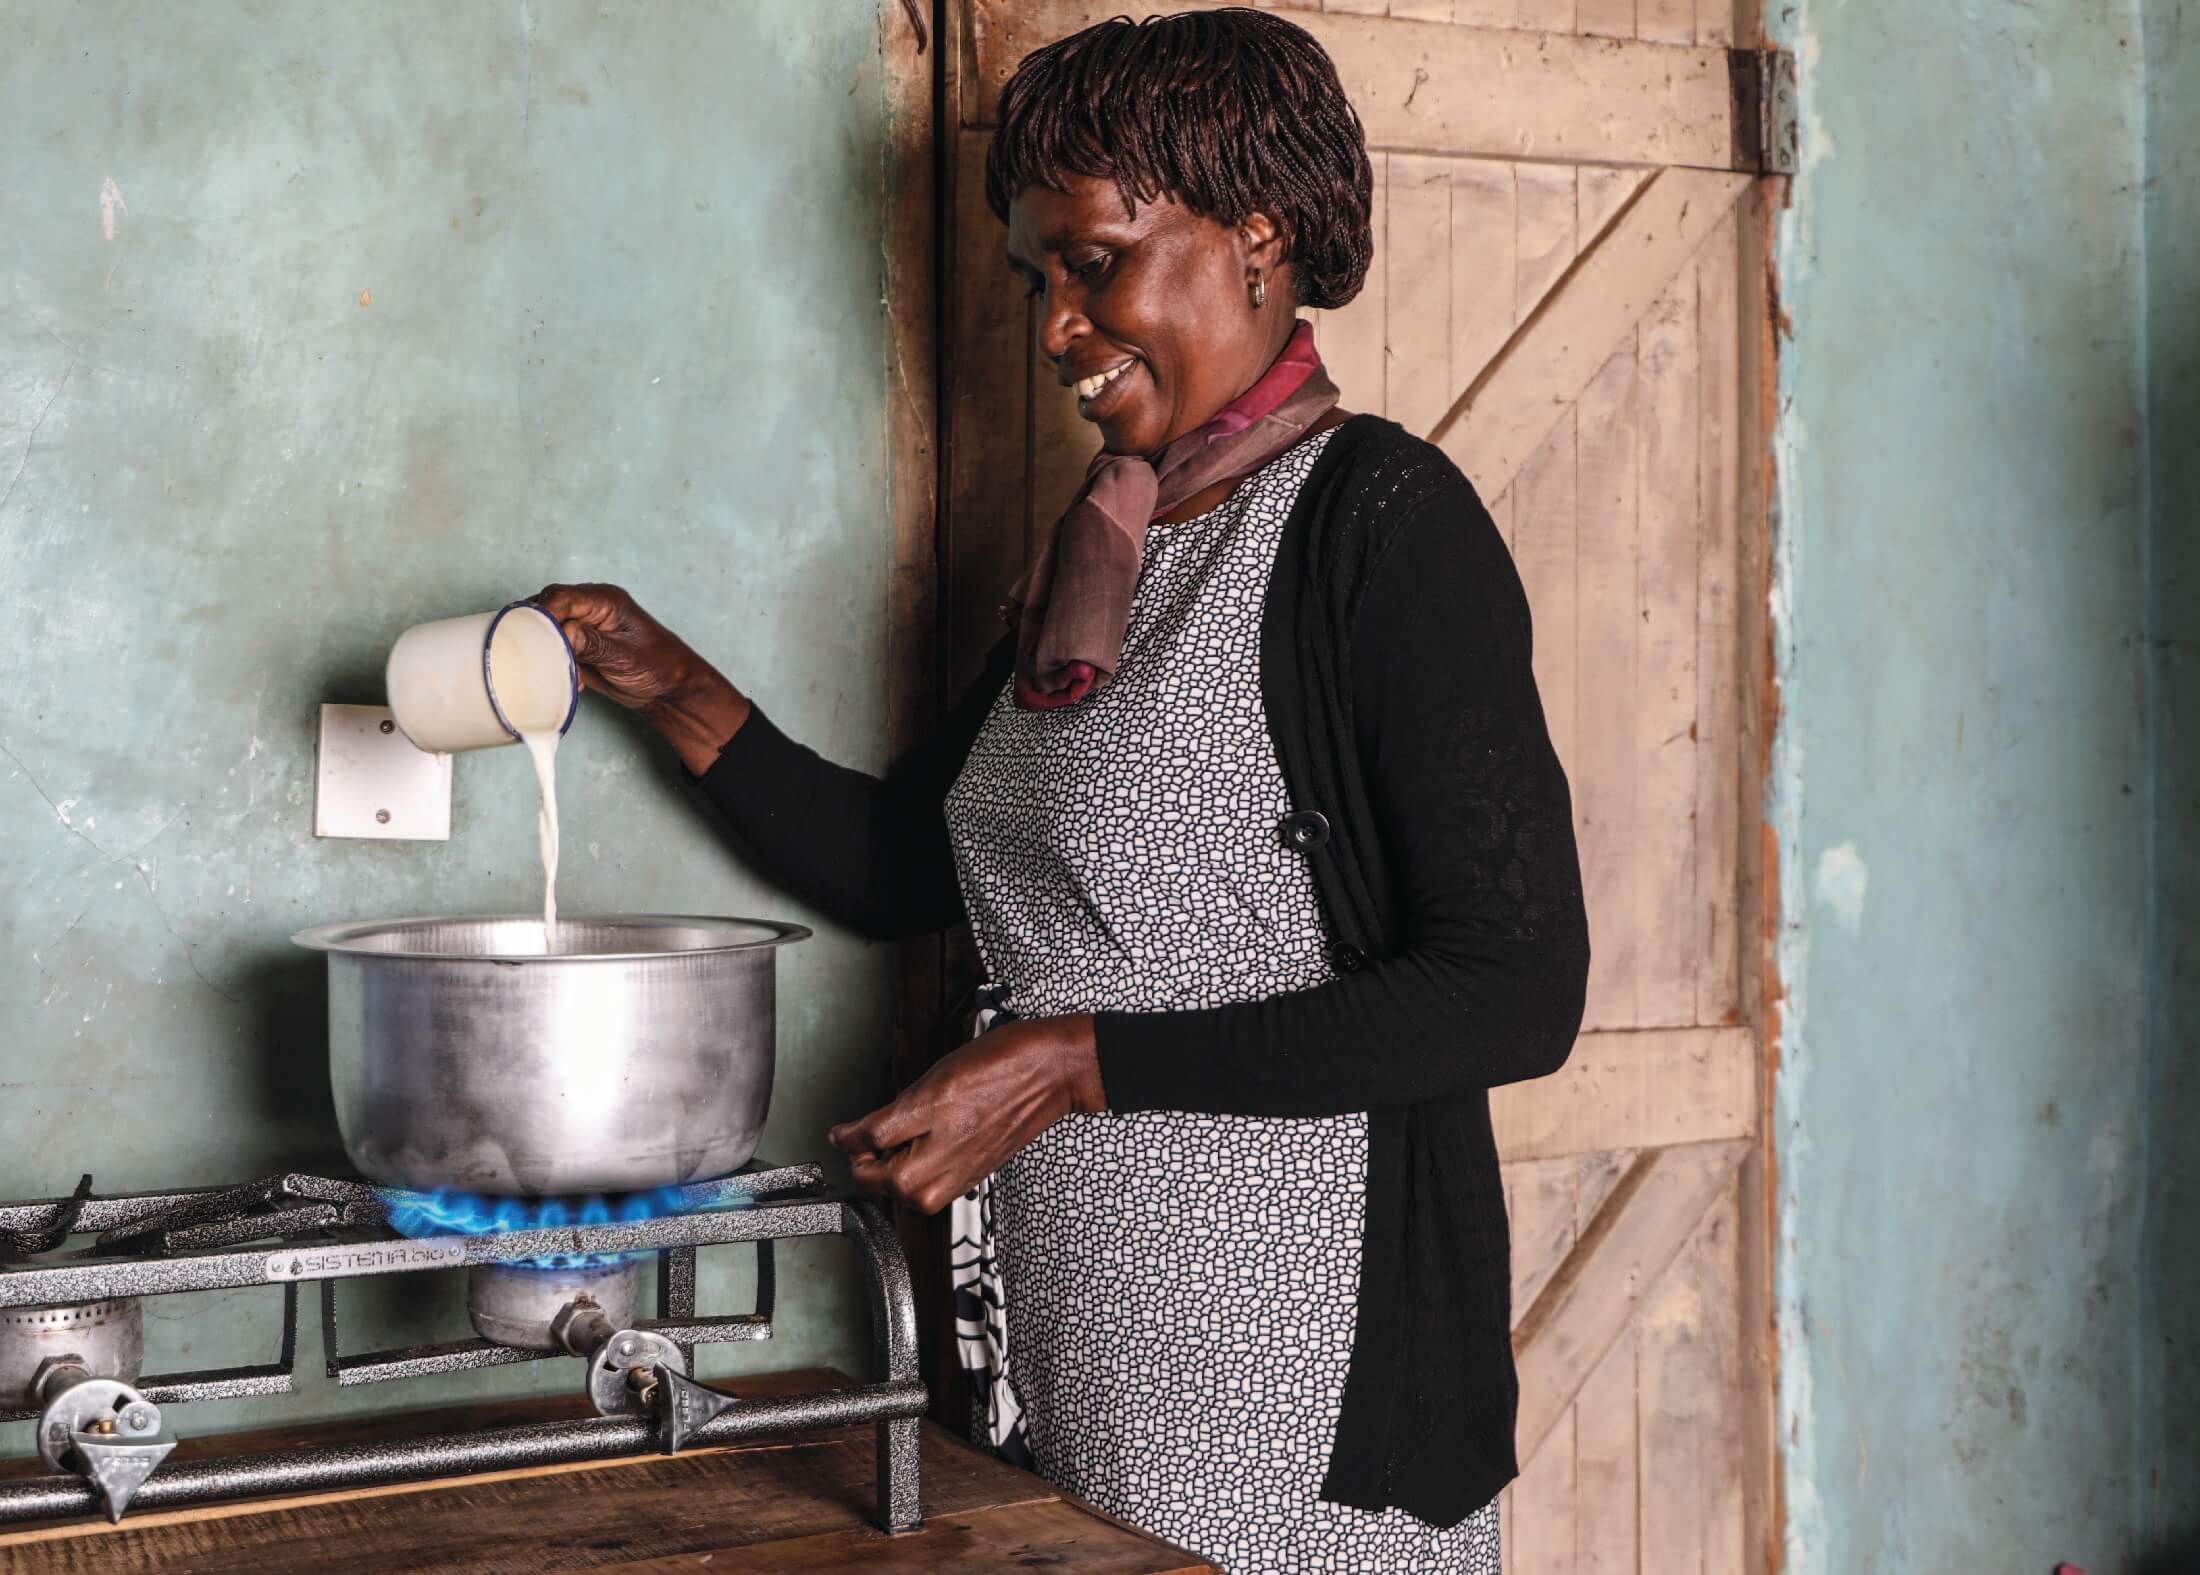 Over half a million Zambians to receive access to clean cooking solutions through first cohort of companies